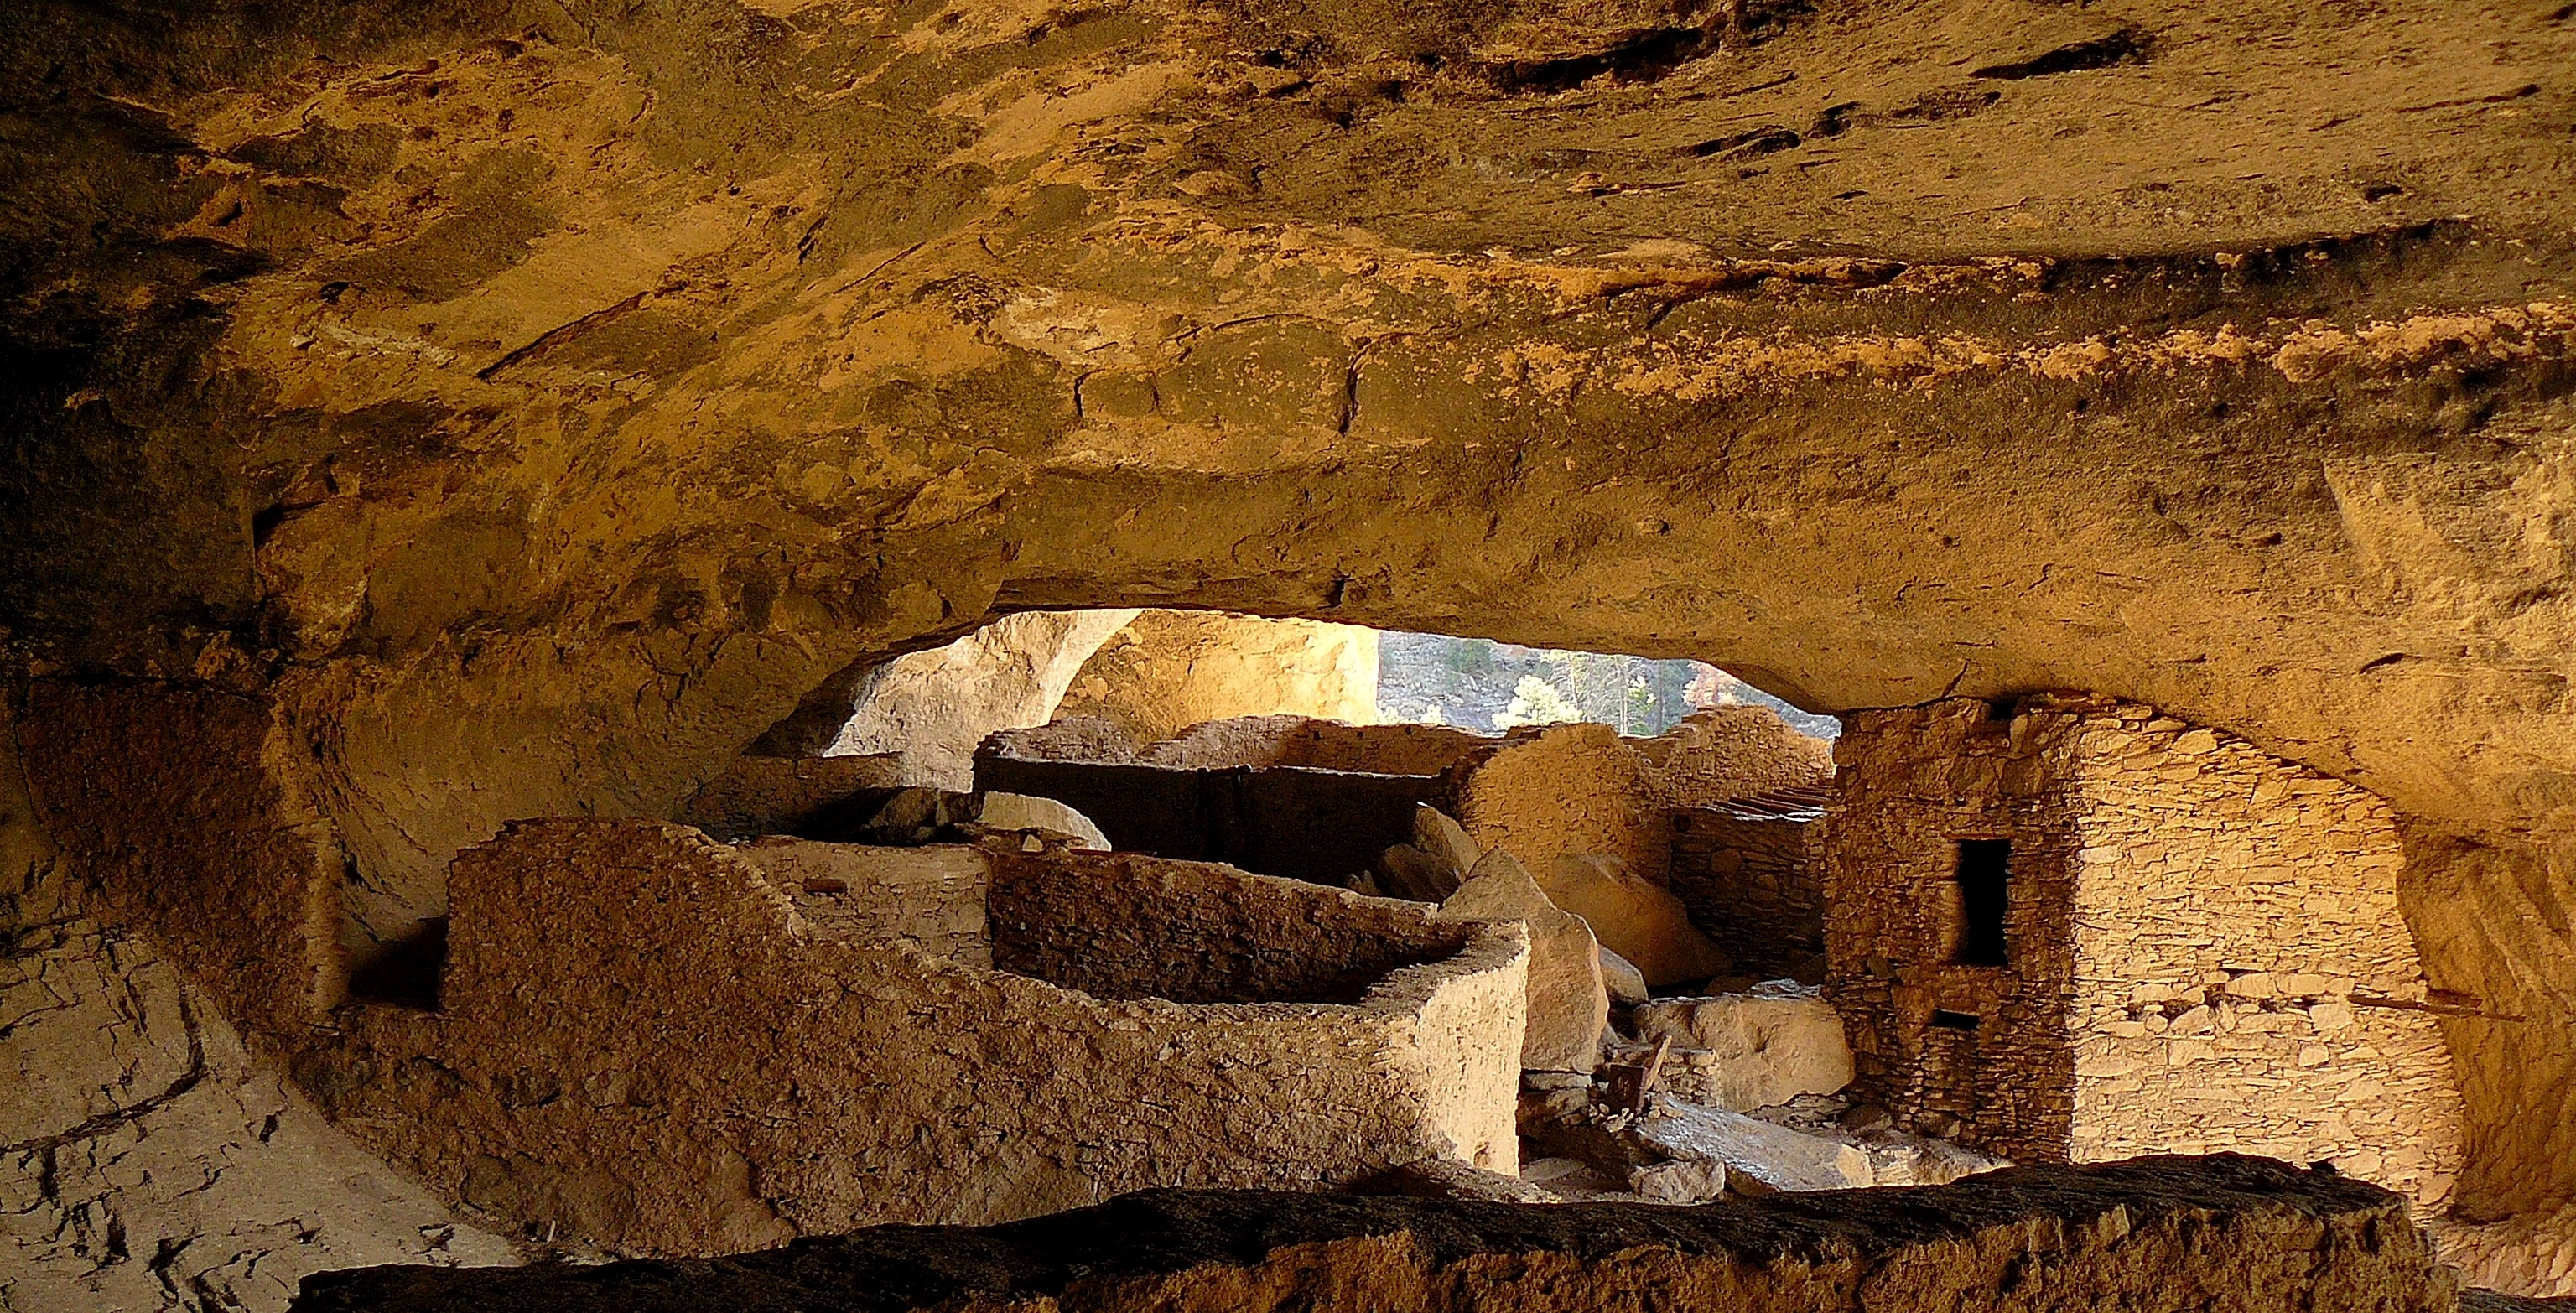 View of Mogollon dwelling rooms within a cave.